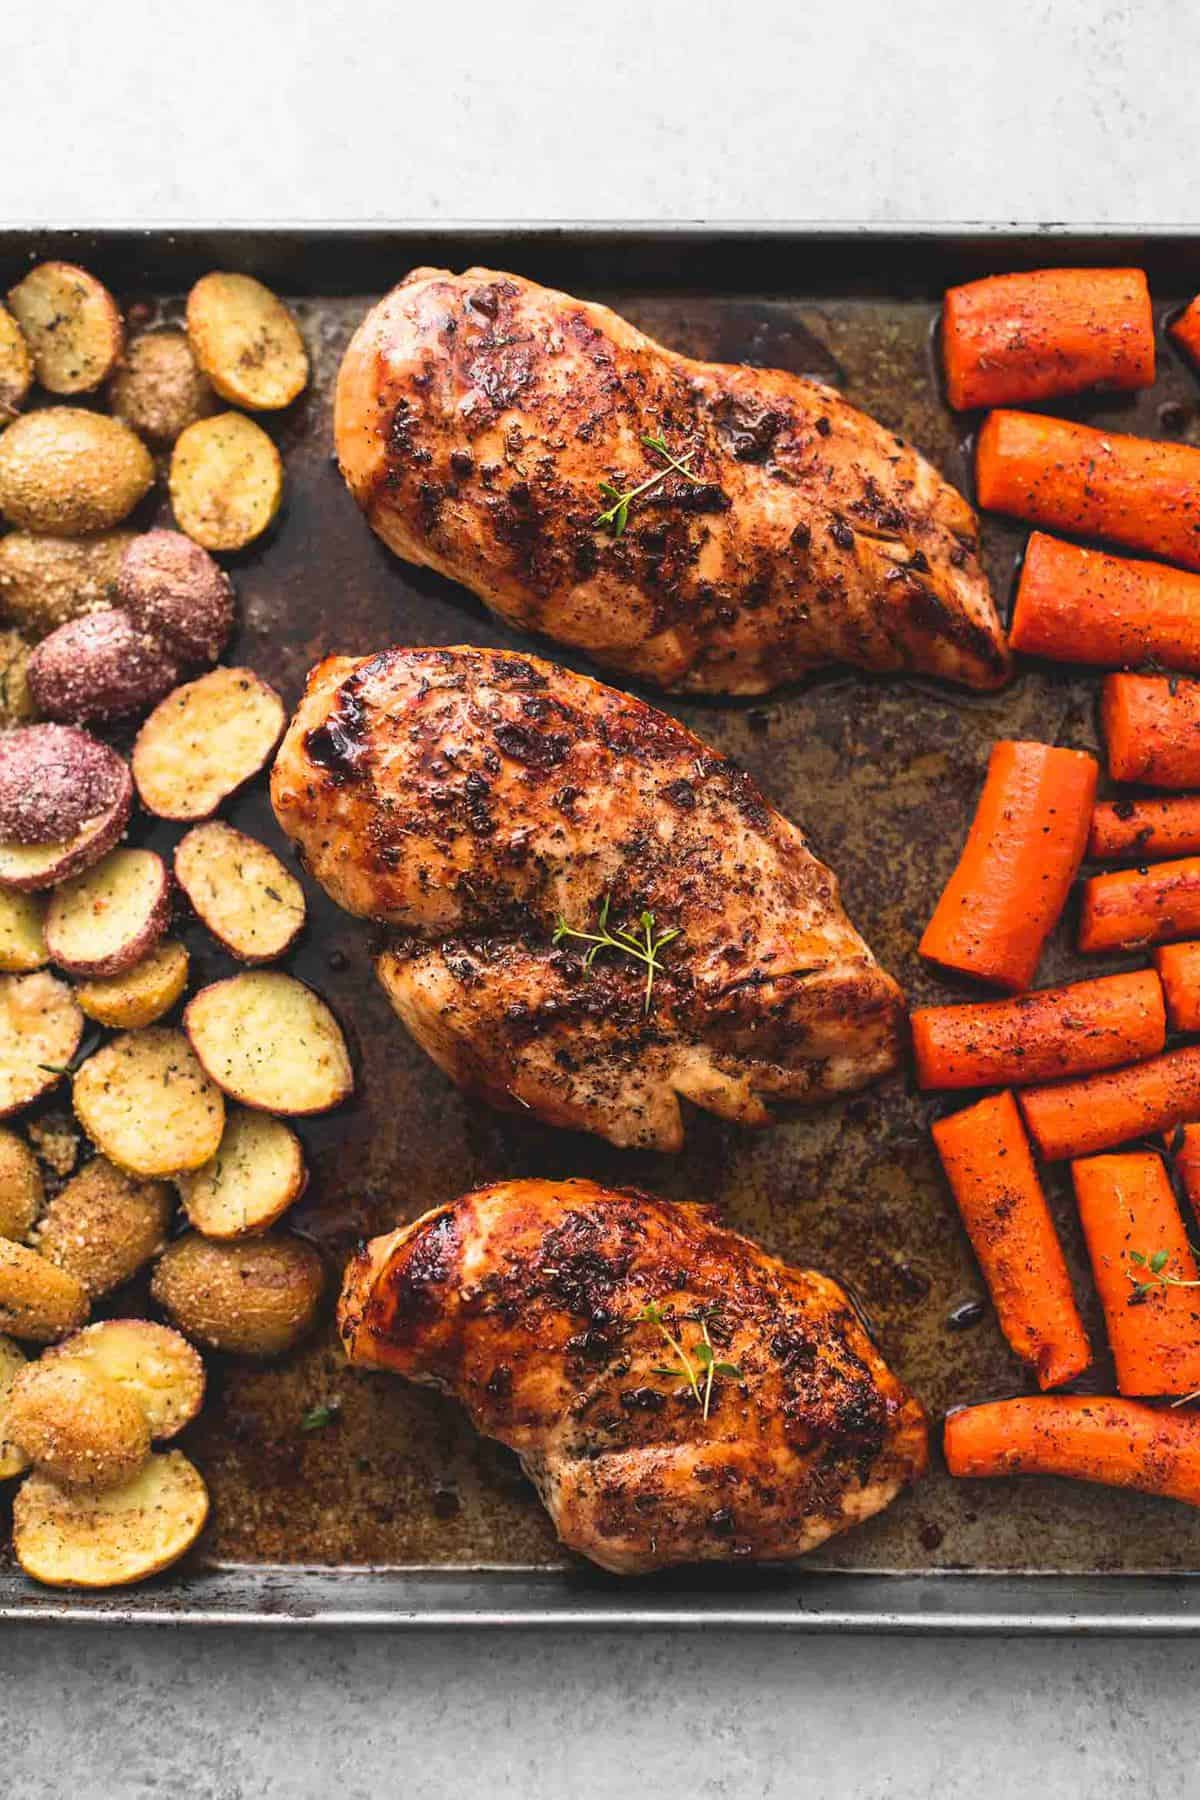 The 9 Best Baking Sheets for Baking Sheet Pan Chicken, Chocolate